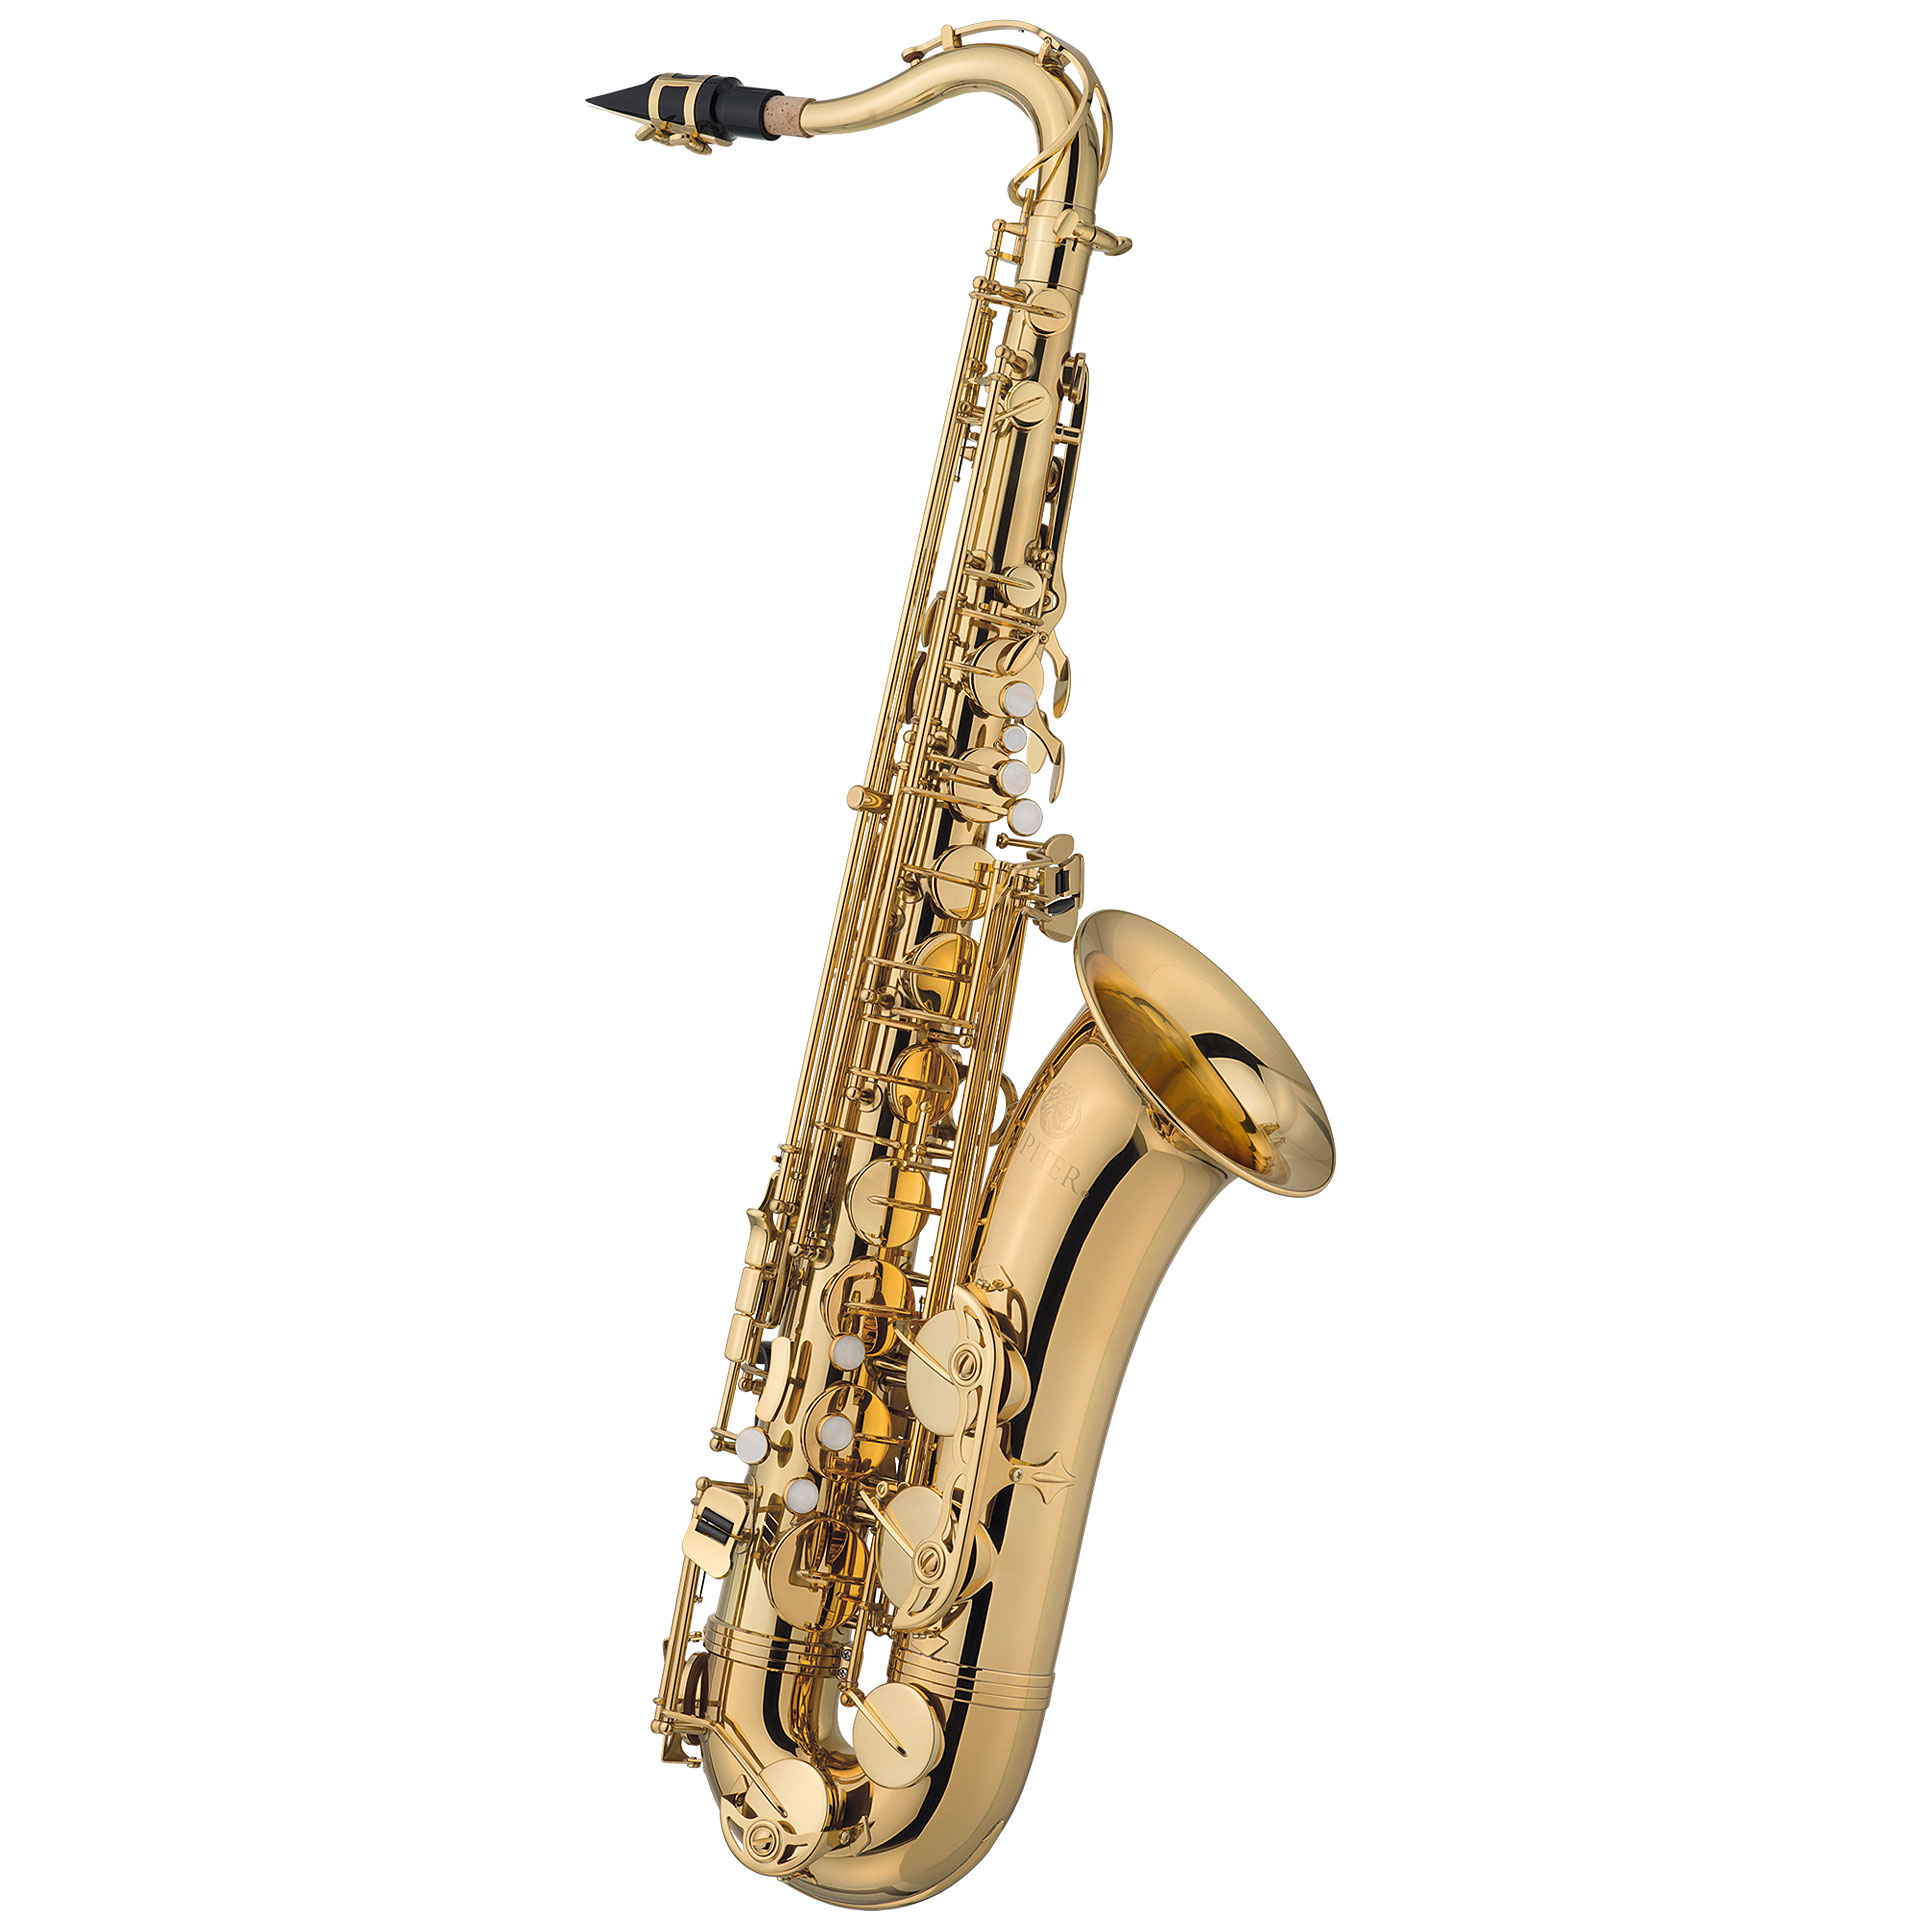 Saxophone: Jupiter JTS500Q Tenor, One of a group of single-reed woodwind instruments. 1920x1920 HD Wallpaper.